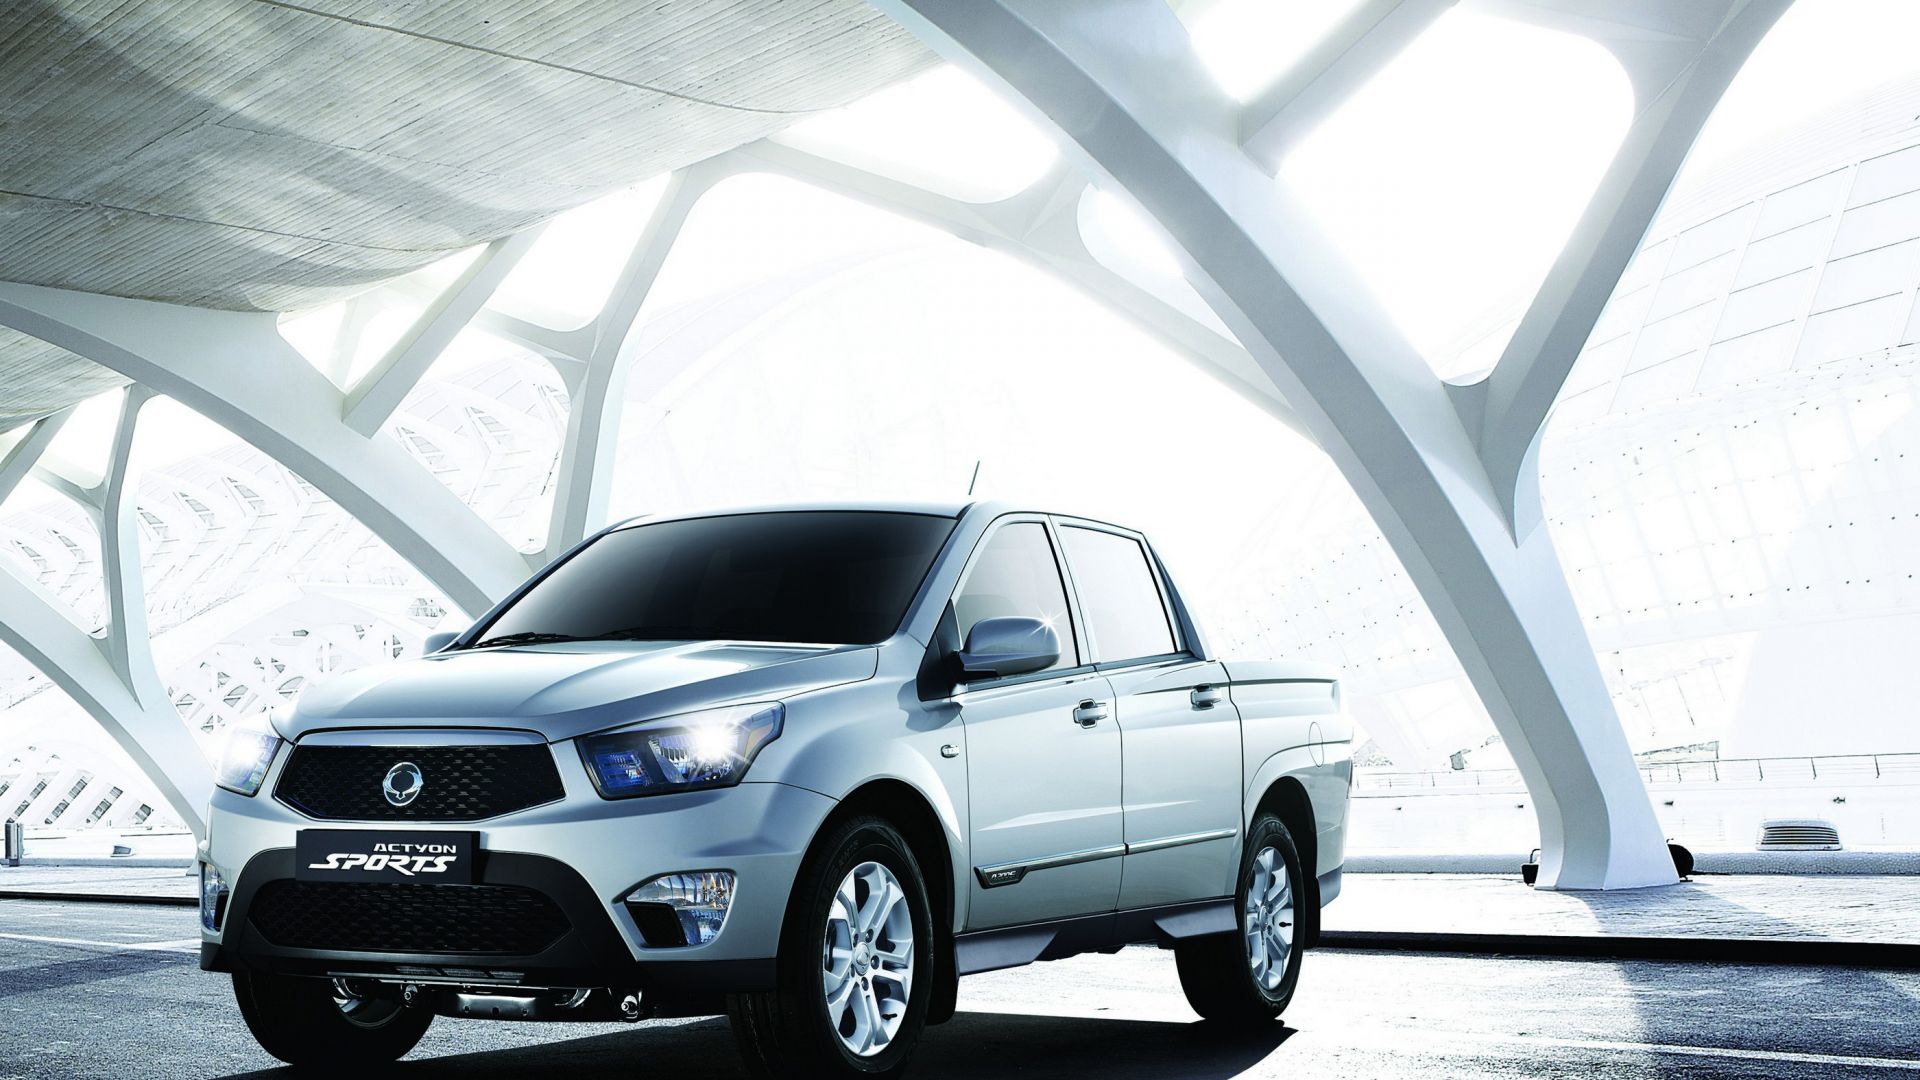 Actyon sport масло. SSANGYONG Actyon Sports. SSANGYONG Actyon Sports 2012. SSANGYONG Actyon Sports 2. SSANGYONG Actyon Sports 2021.